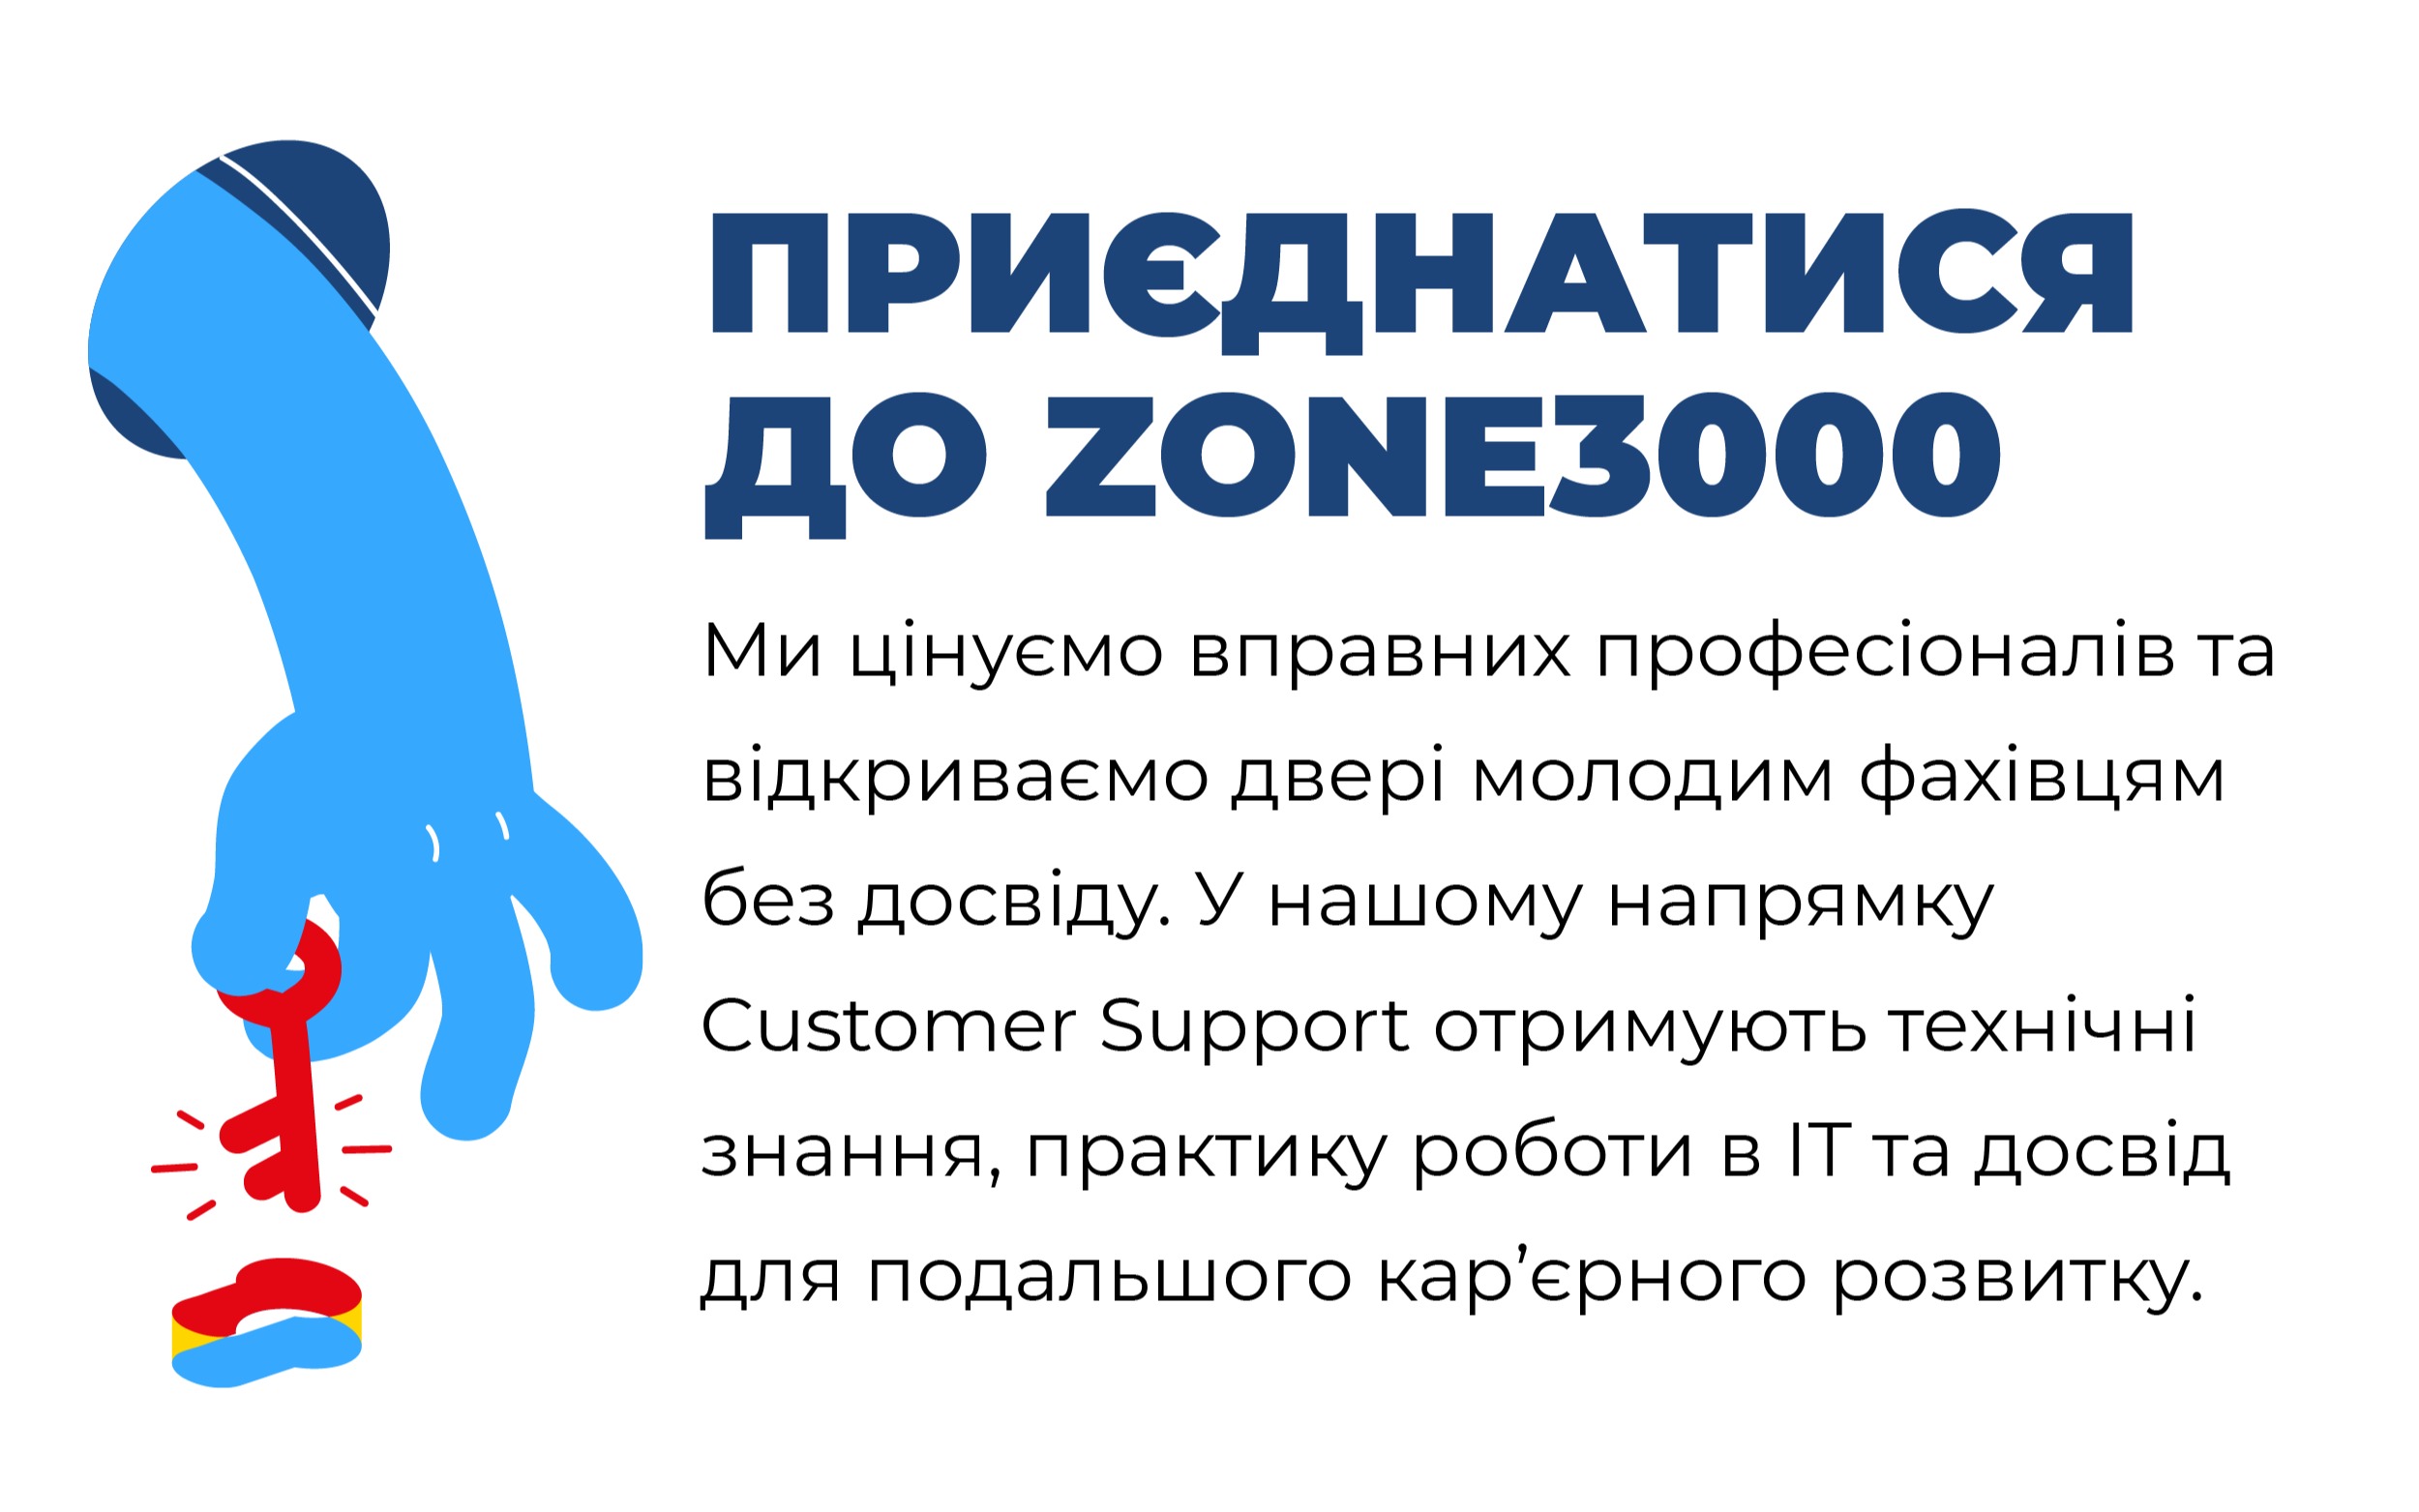 ZONE3000 — вакансия в Junior R&D Engineer in Hosting Services Team (Linux System Administrator): фото 11